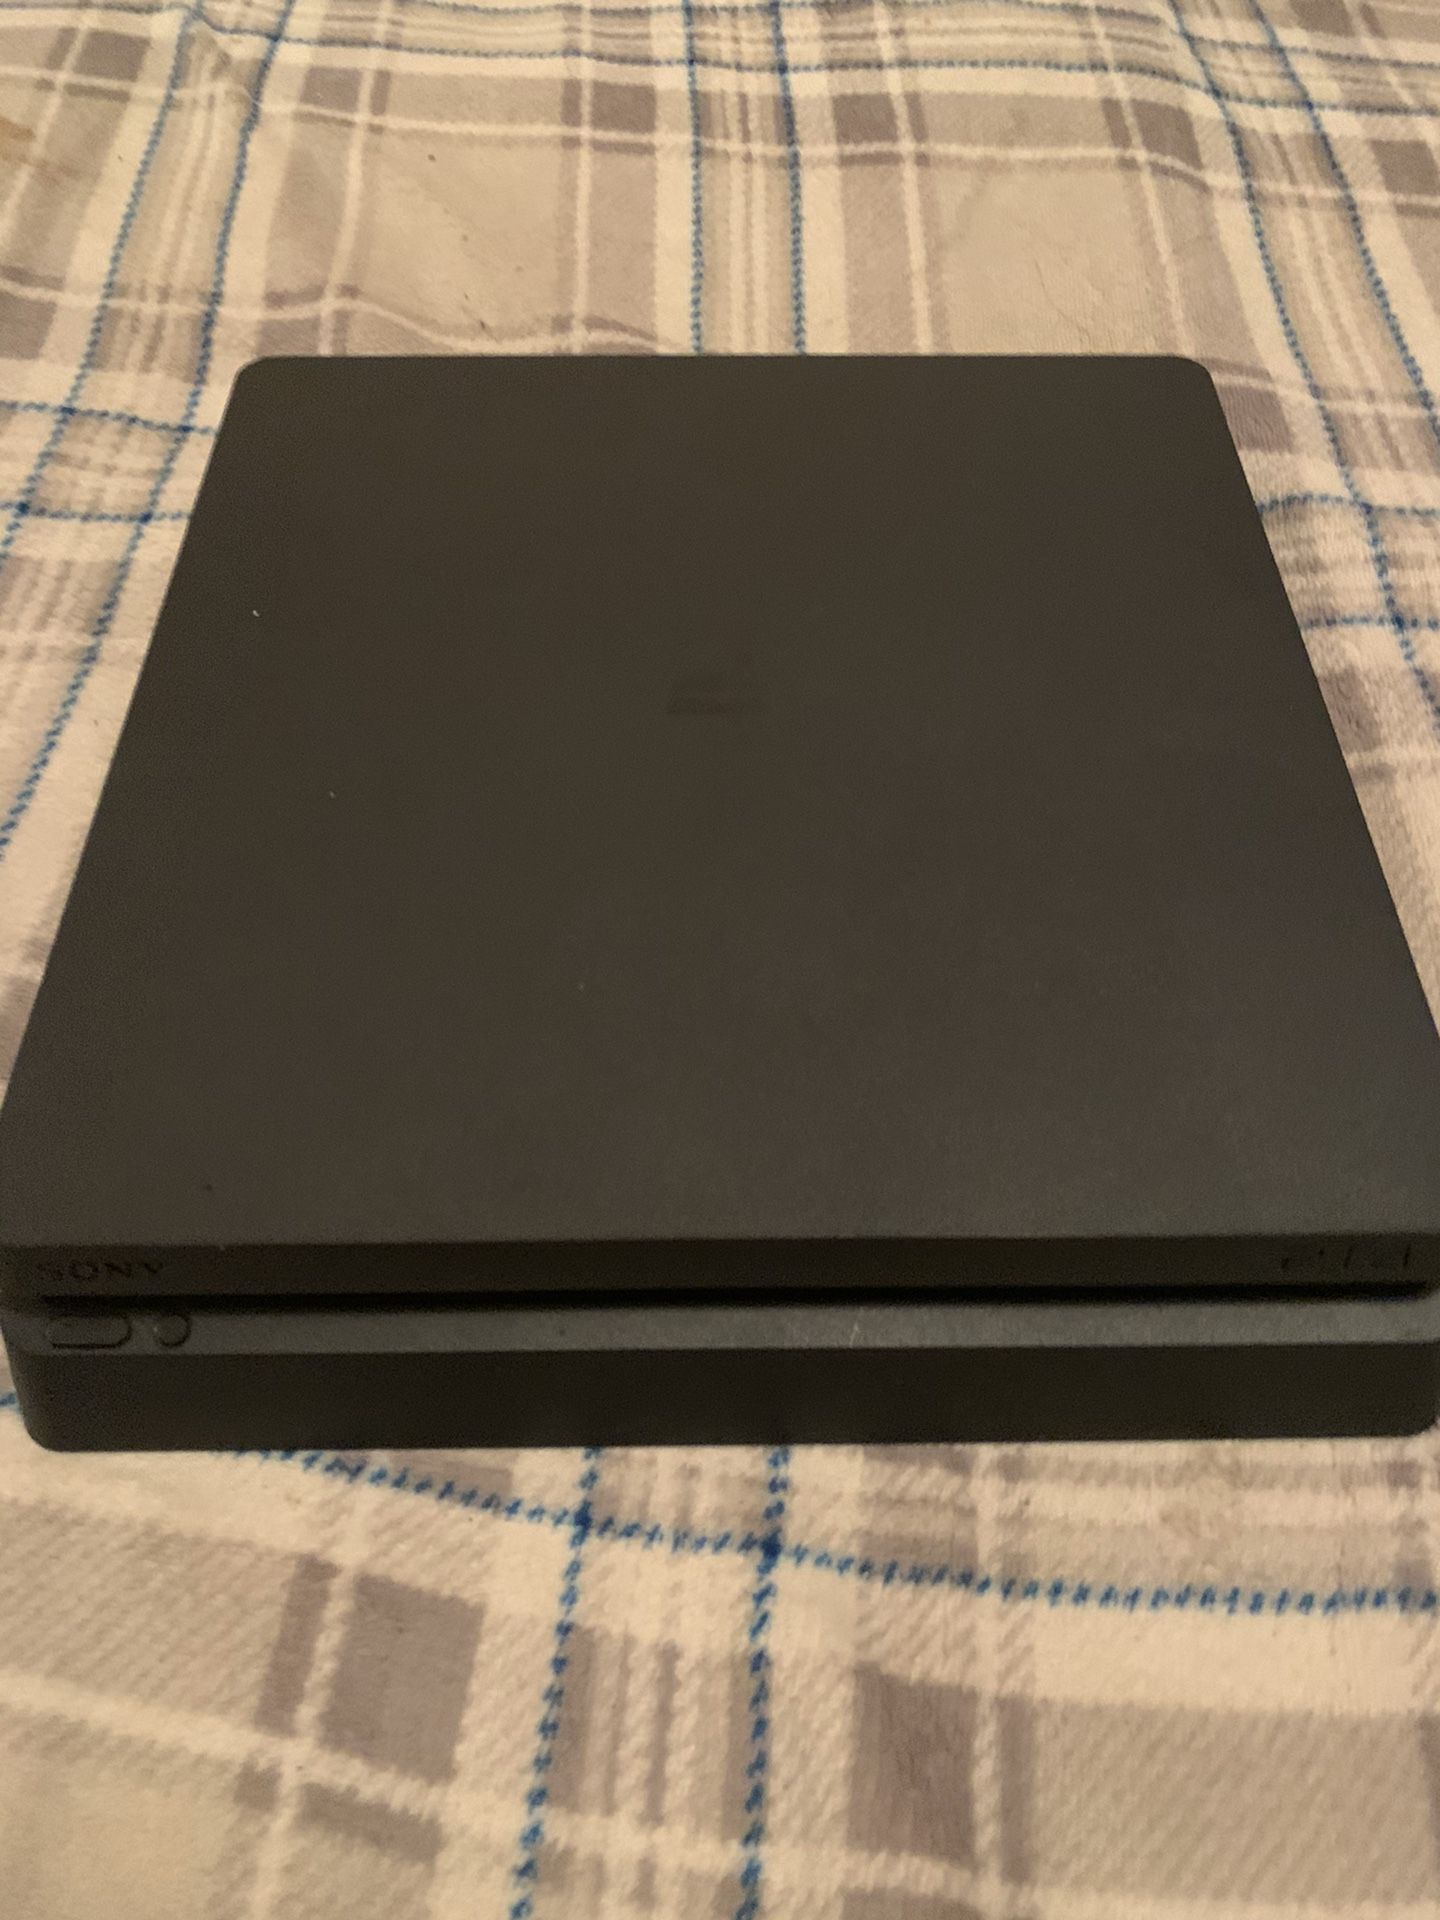 PlayStation 4 Slim (1tb) (Disc Tray Doesn’t Work but is usable)